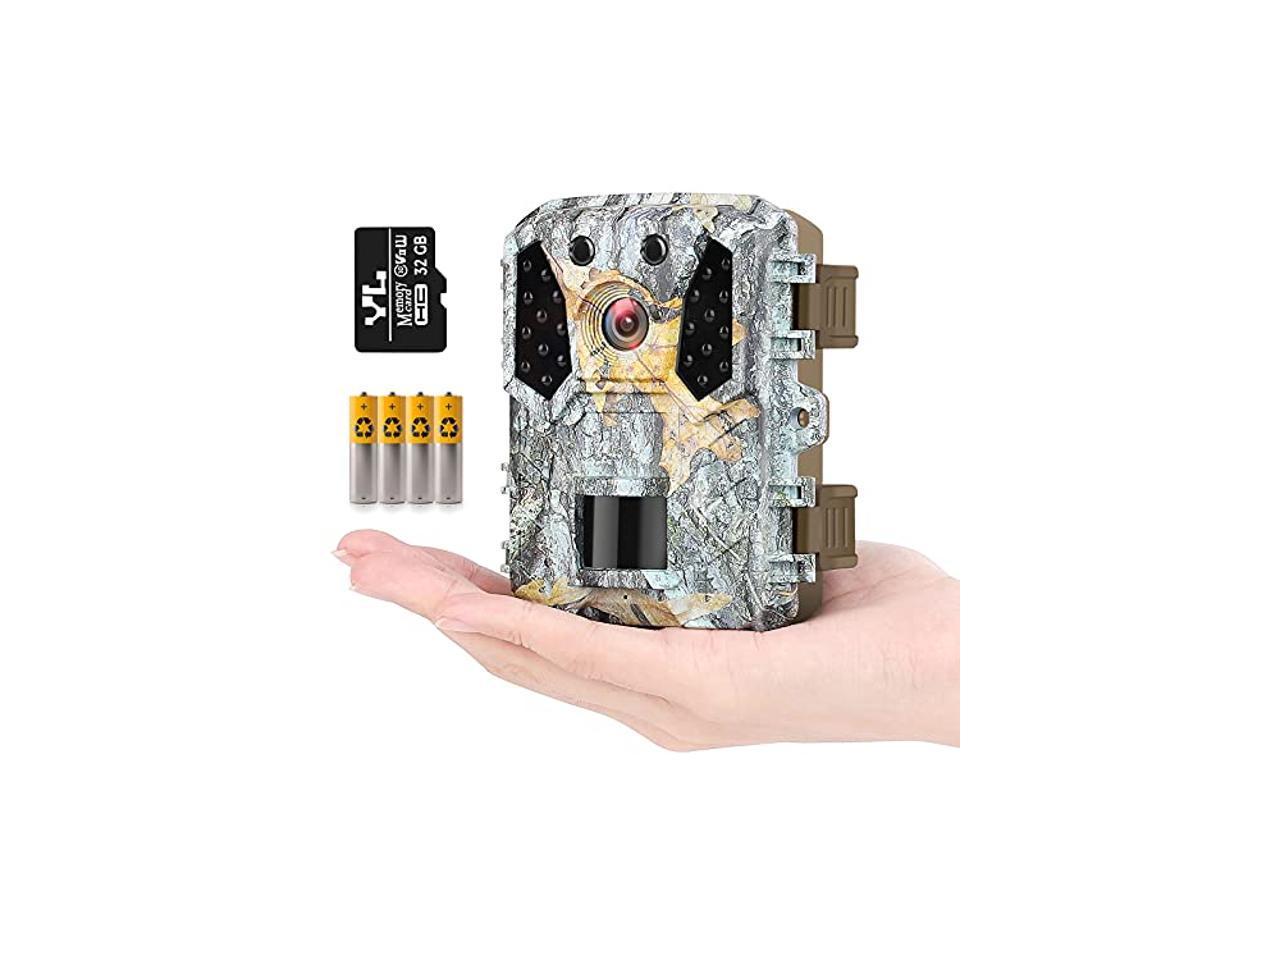 20MP 1080P，Free 32G mrico SD Card and 4AA Batteries,Game Camera Infrared Sensors 120° Low Glow IR Night Vision Motion Activated,2 LCD,IP65 Waterproof HAWKRAY Mini Trail Game Camera-M2 